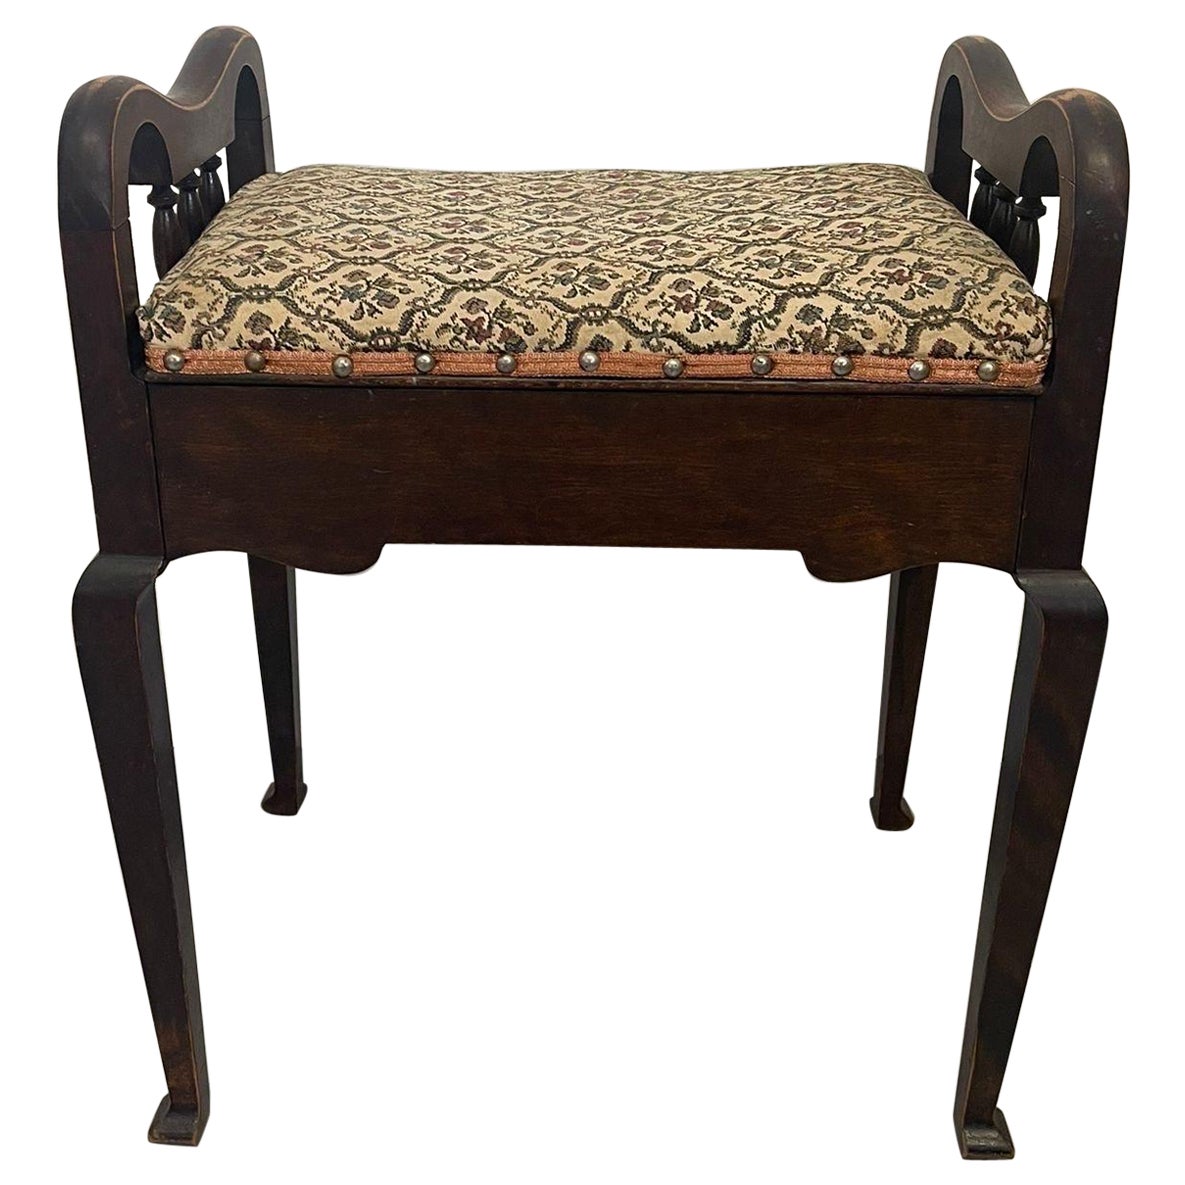 Vintage Cushioned Upholstered Stool With Storage and Wooden Frame. For Sale